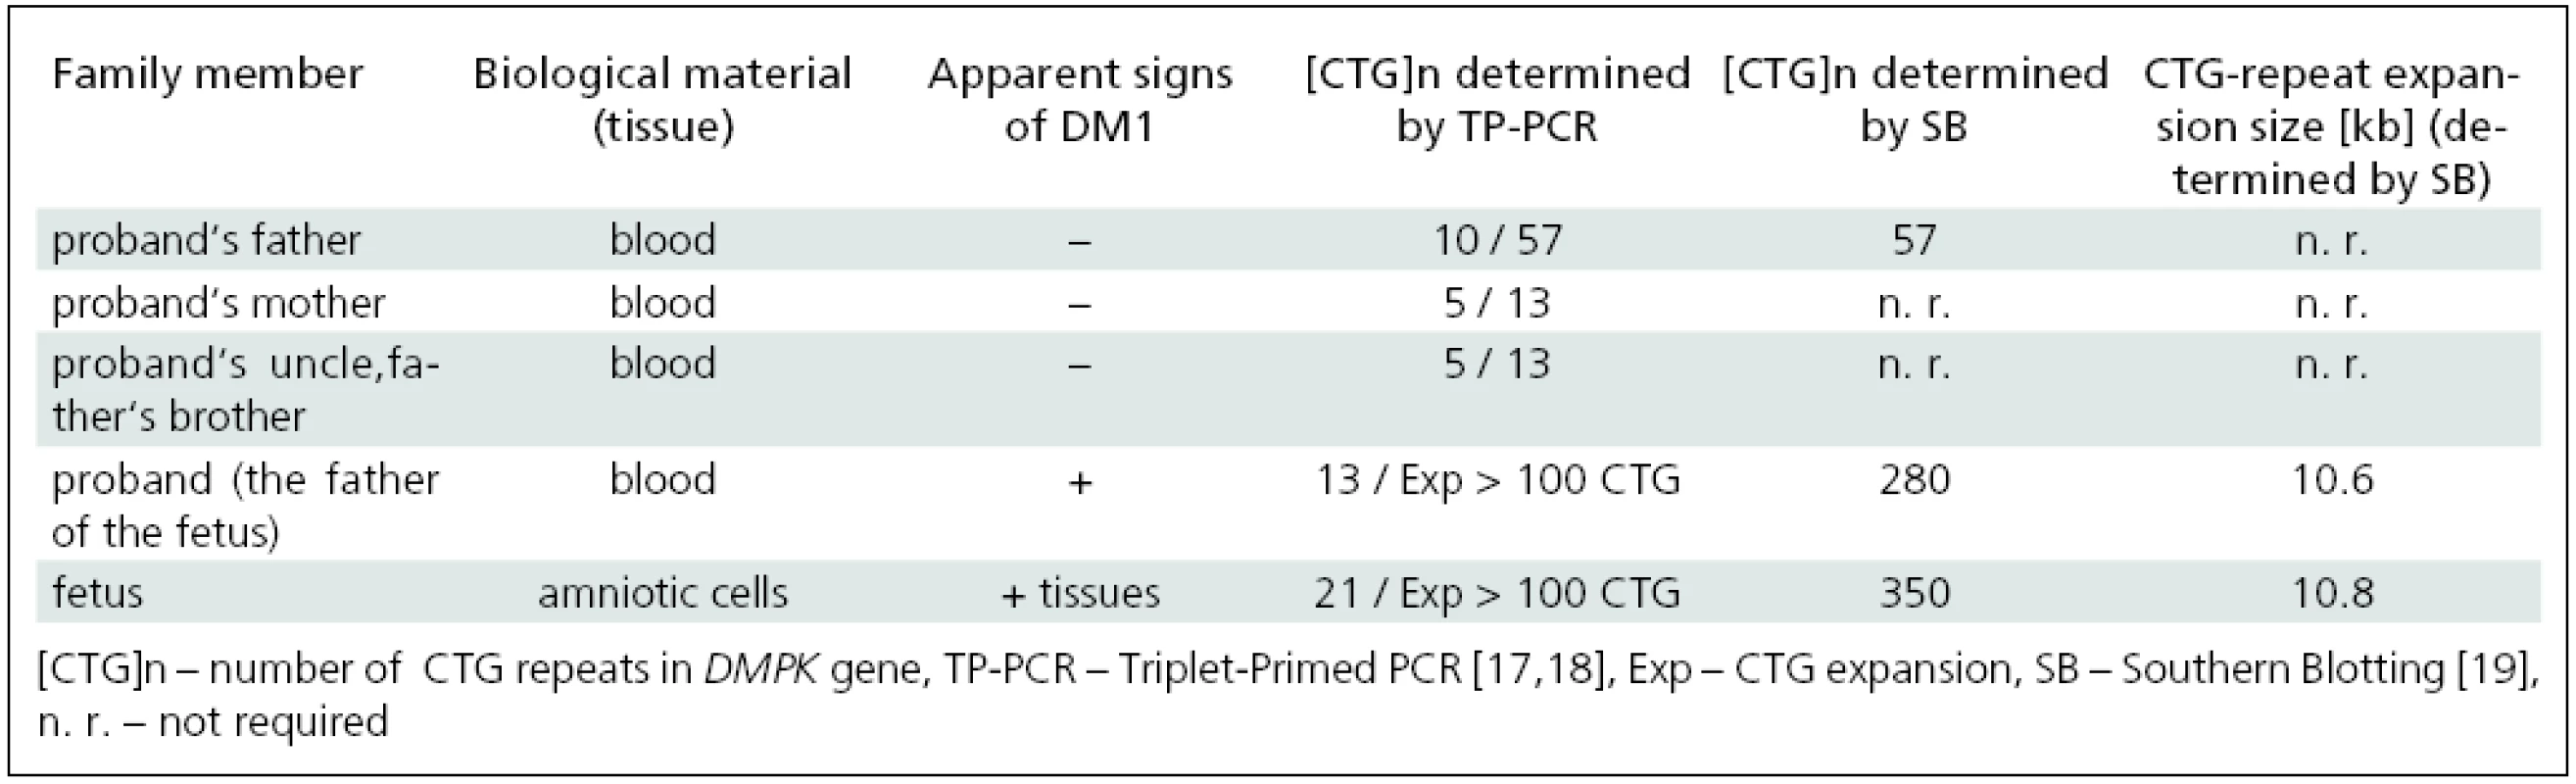 Molecular-genetic analysis (TP-PCR, Southern blotting) of the DM1 family.